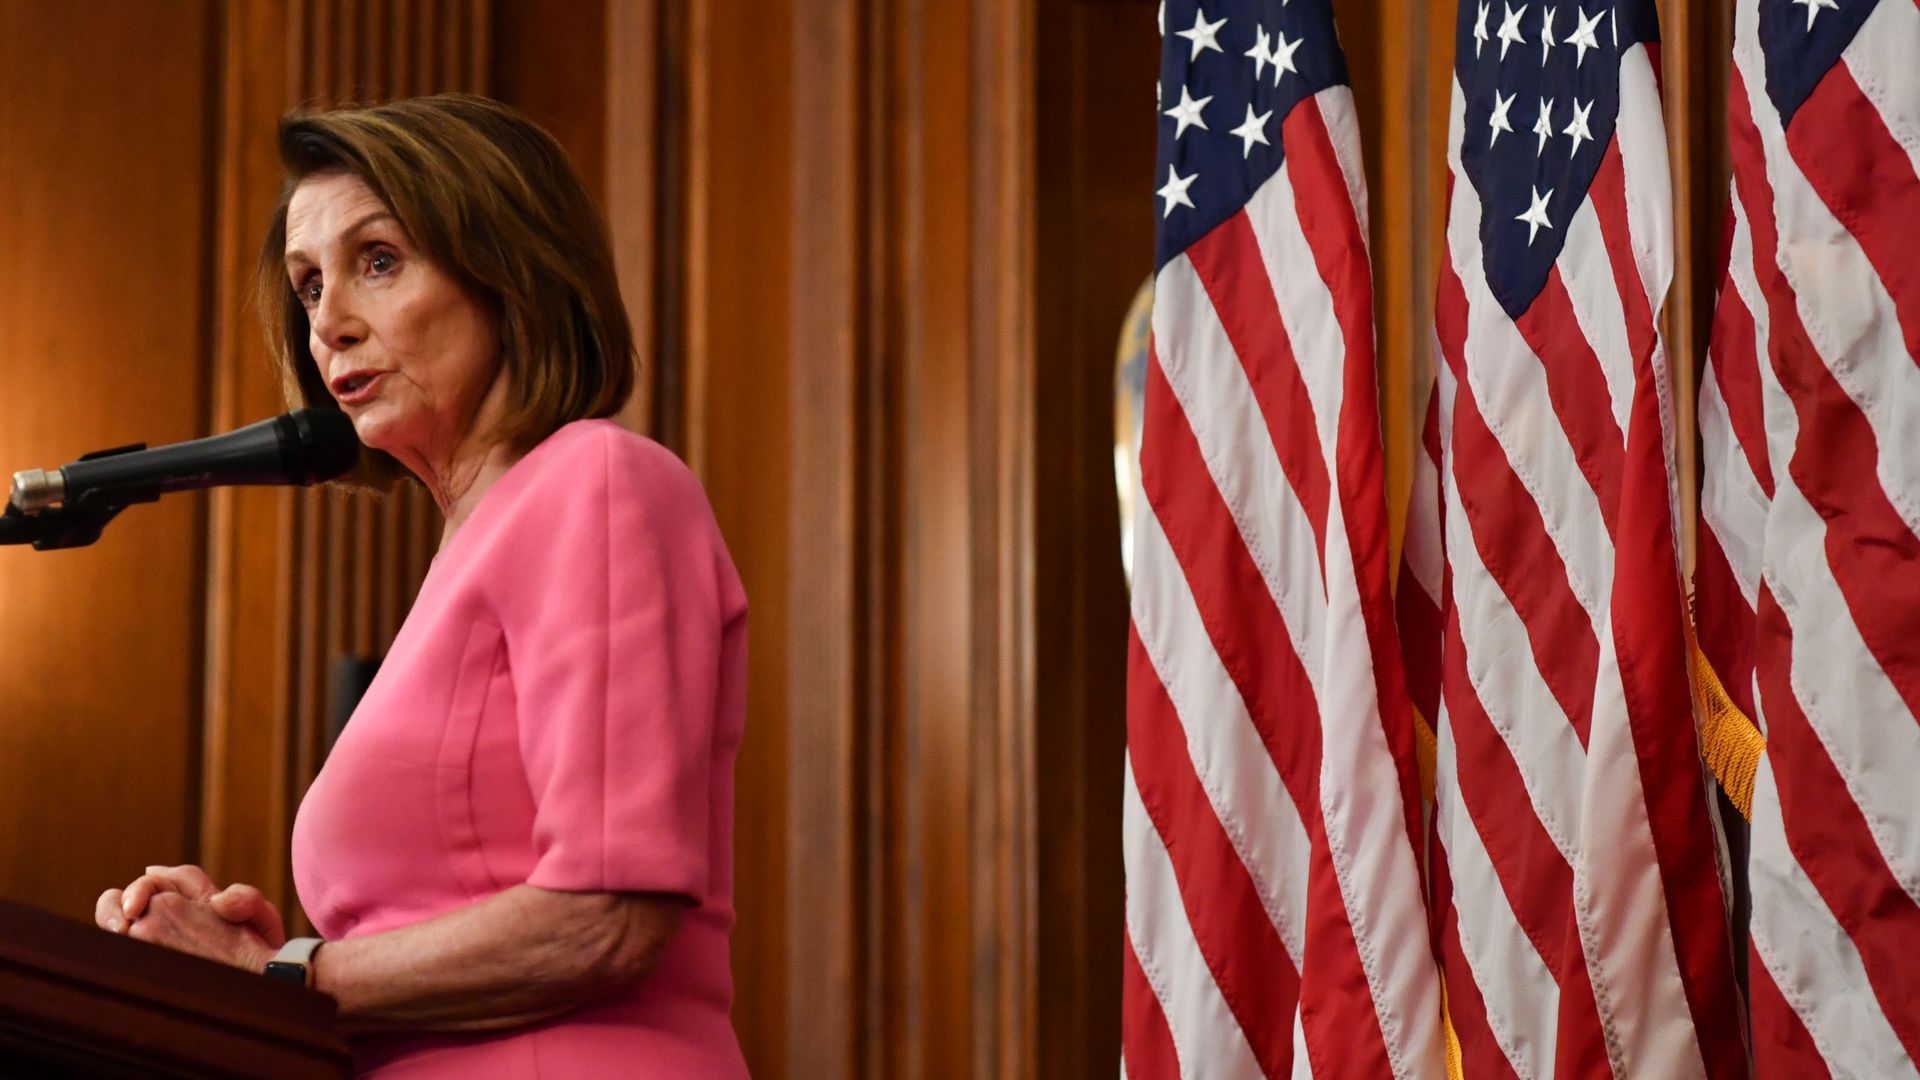 US House Minority leader Nancy Pelosi speaks during a press conference after Democrats took back control of the house in Washington, DC 